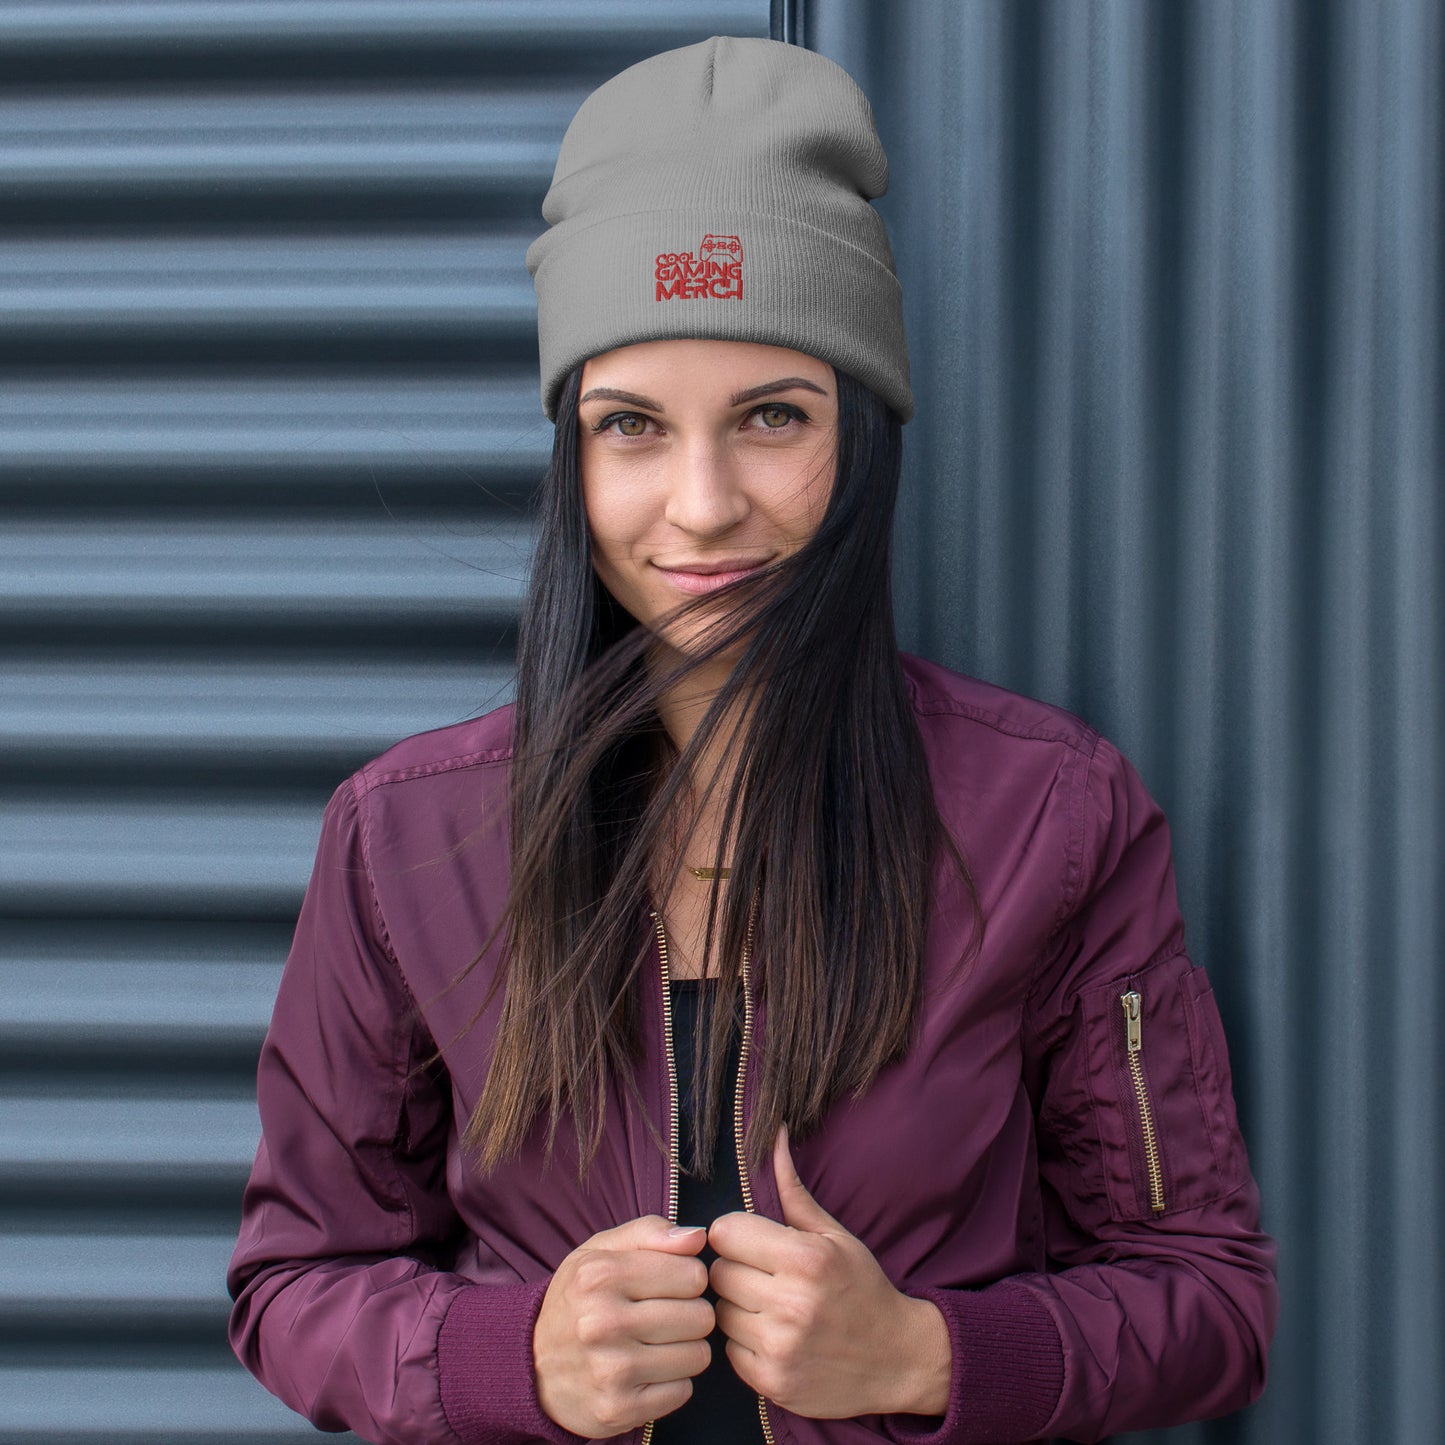 Woman wearing grey beanie hat with cool gaming merch logo